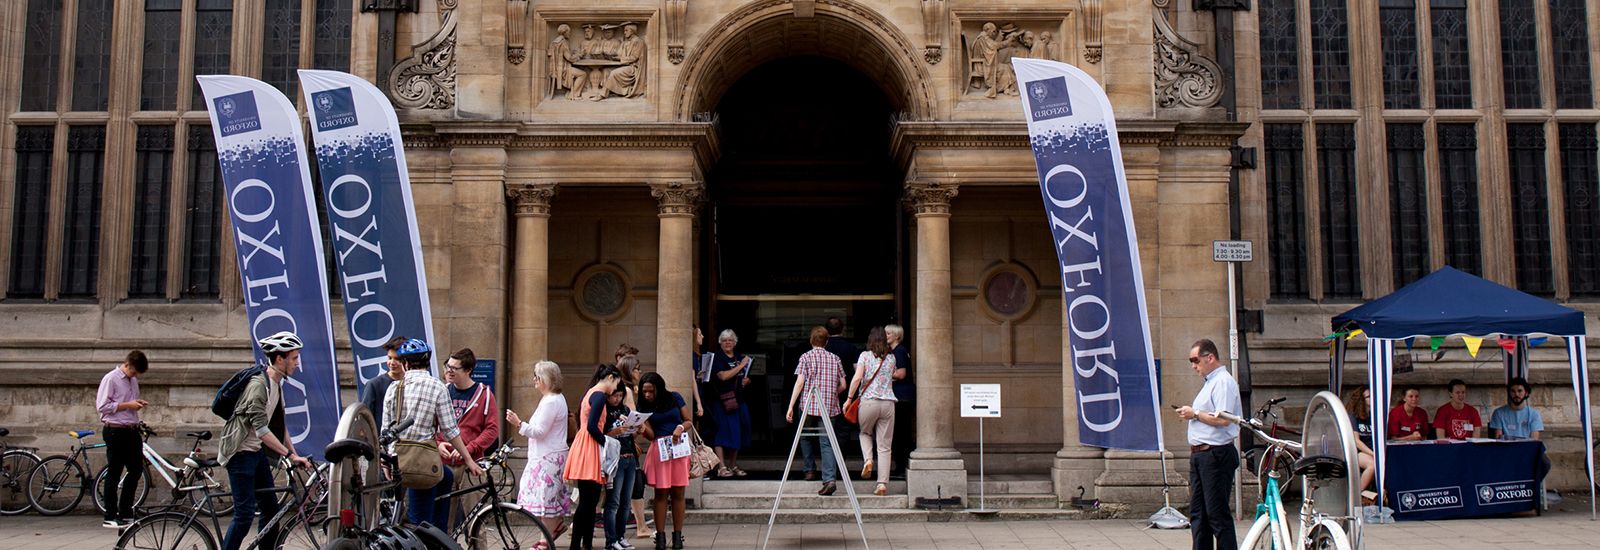 Open Day Information Centre University of Oxford